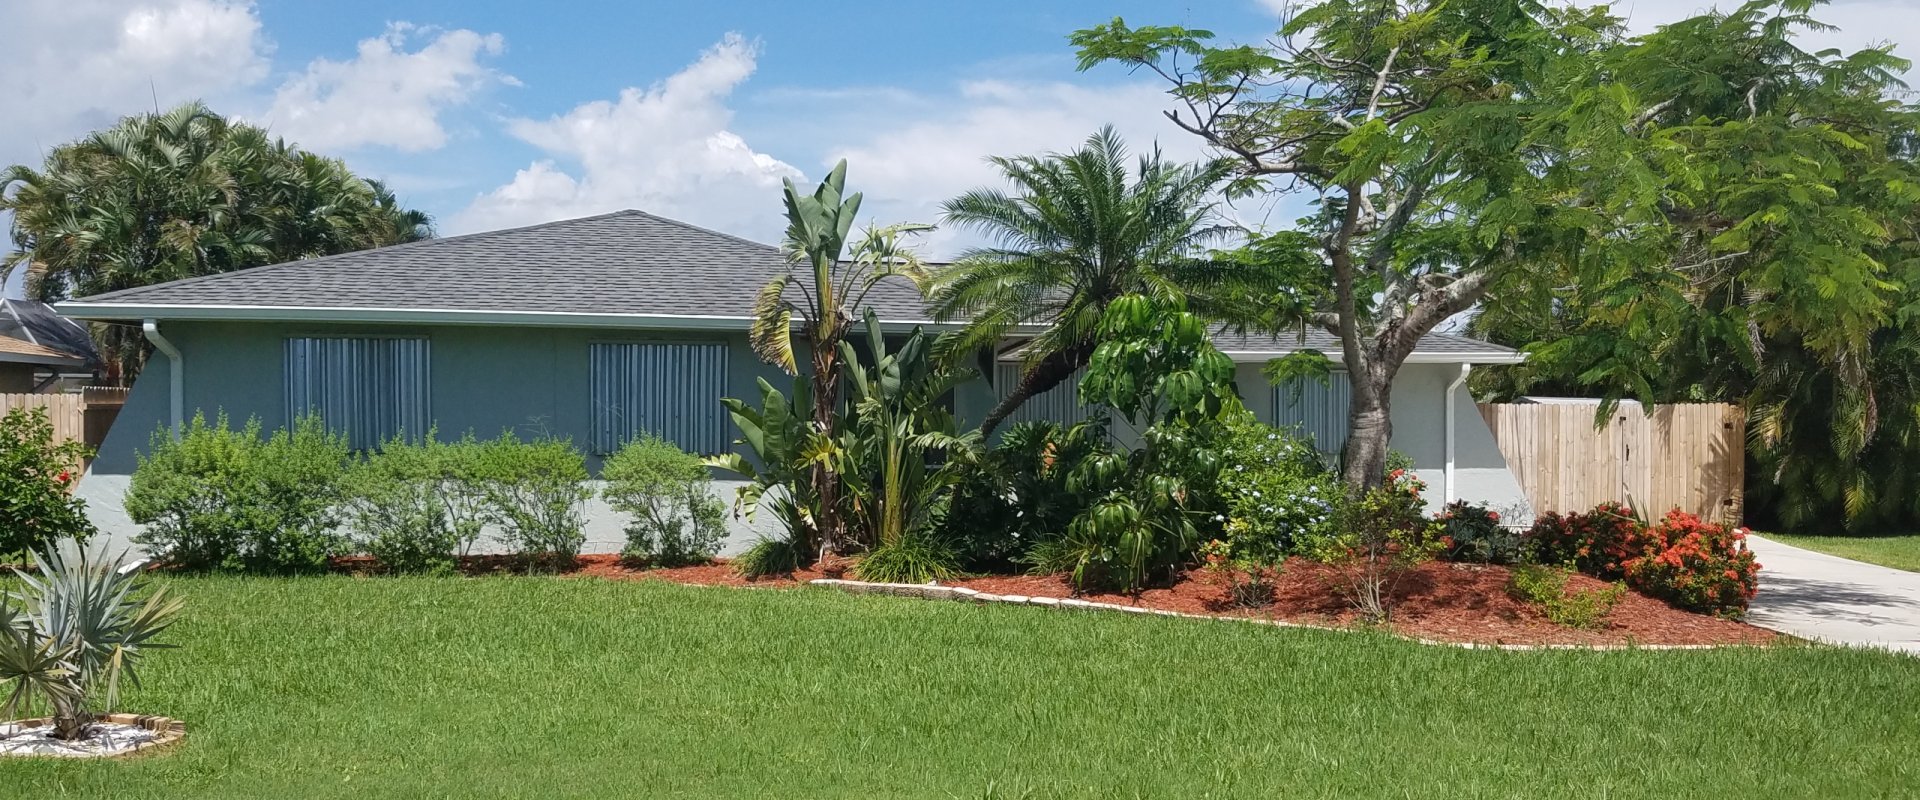 Need to sell your house fast? a house in Bonita Springs Core Real Estate bought for cash.